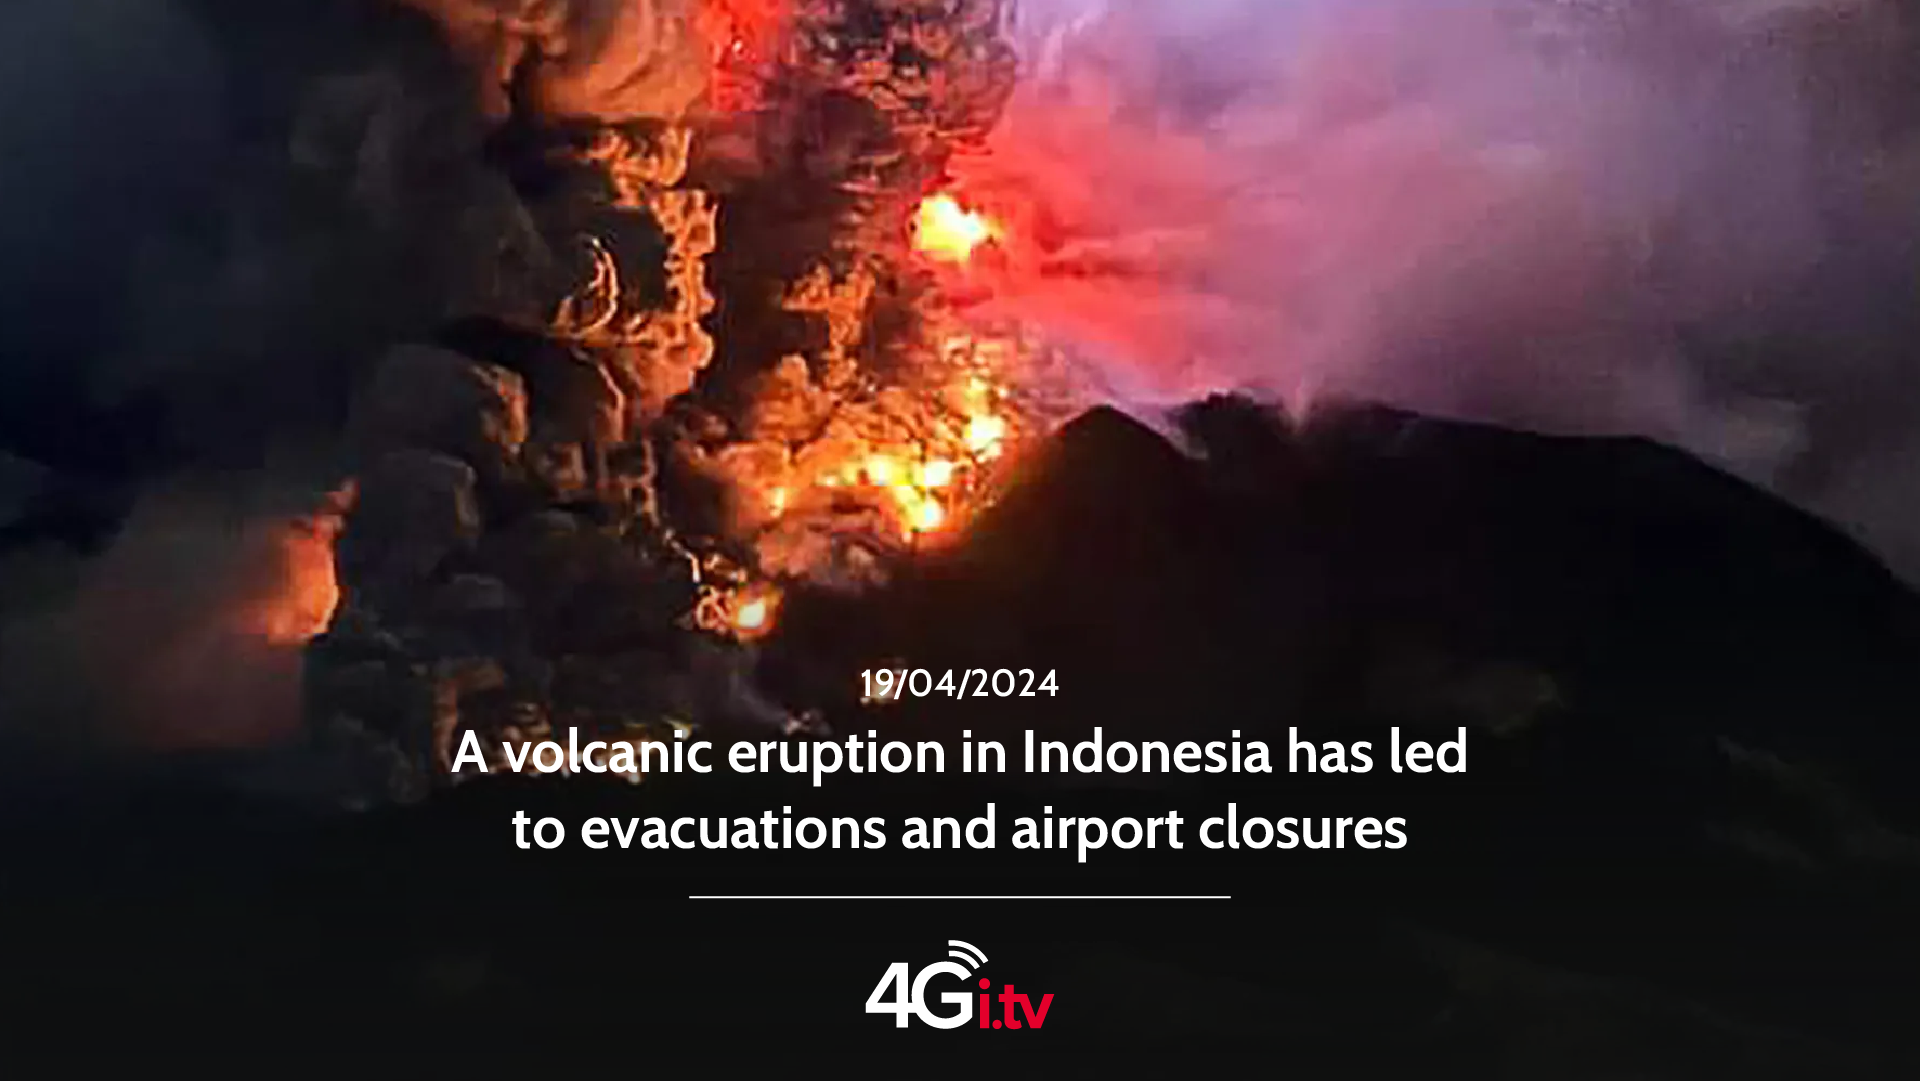 Lesen Sie mehr über den Artikel A volcanic eruption in Indonesia has led to evacuations and airport closures